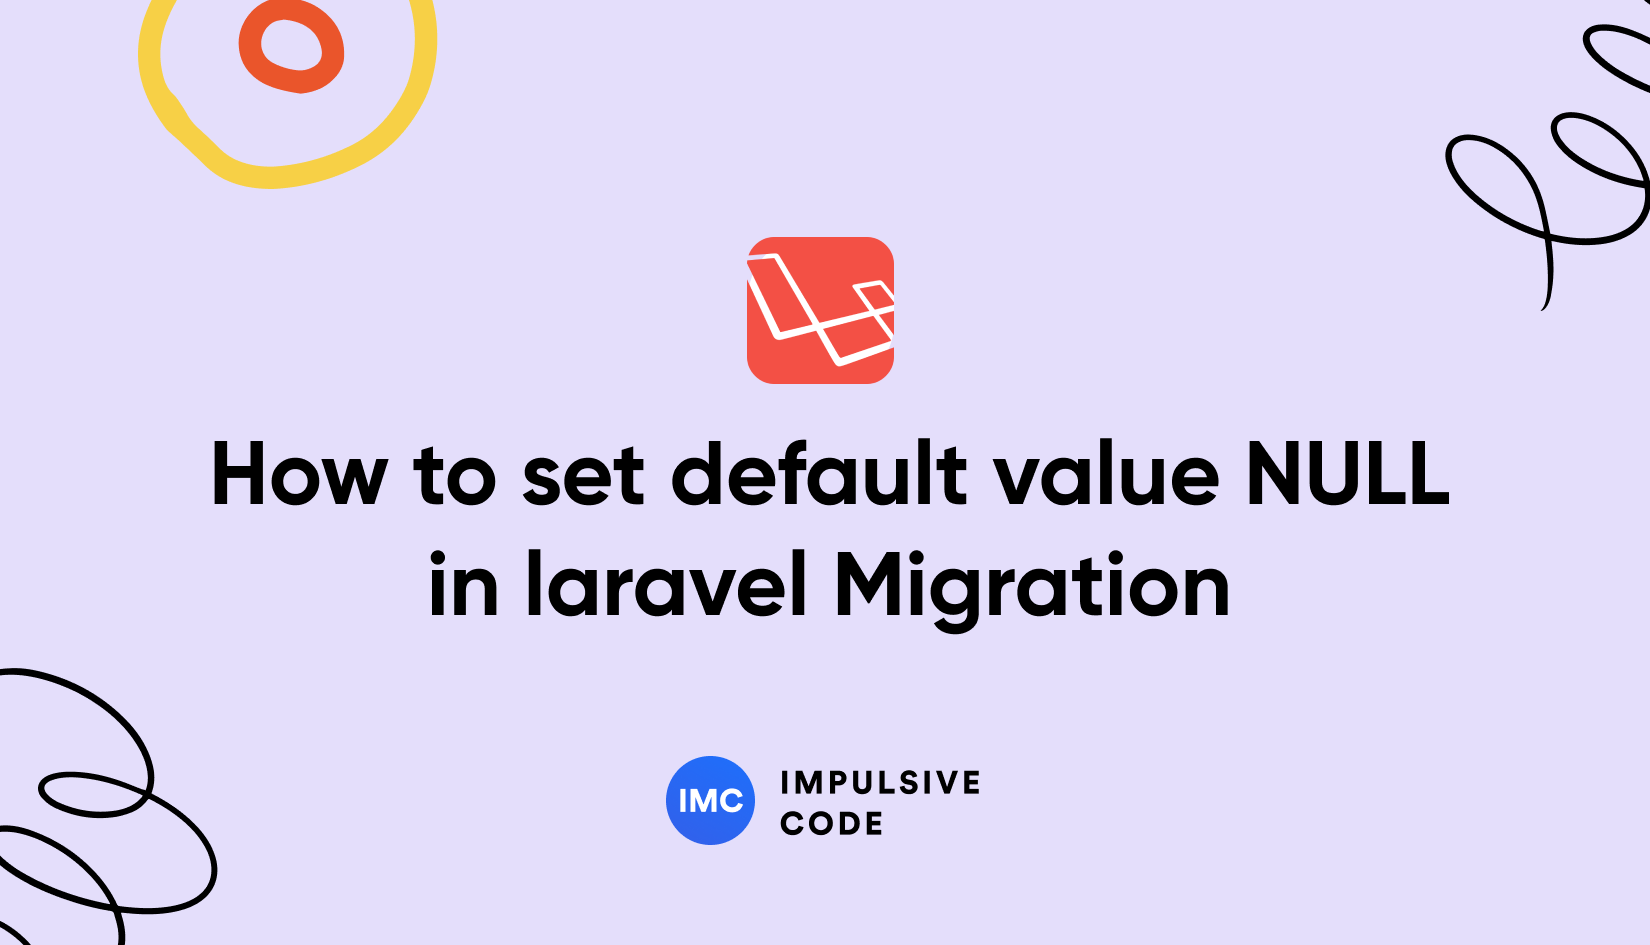 How to set default value NULL in laravel Migration